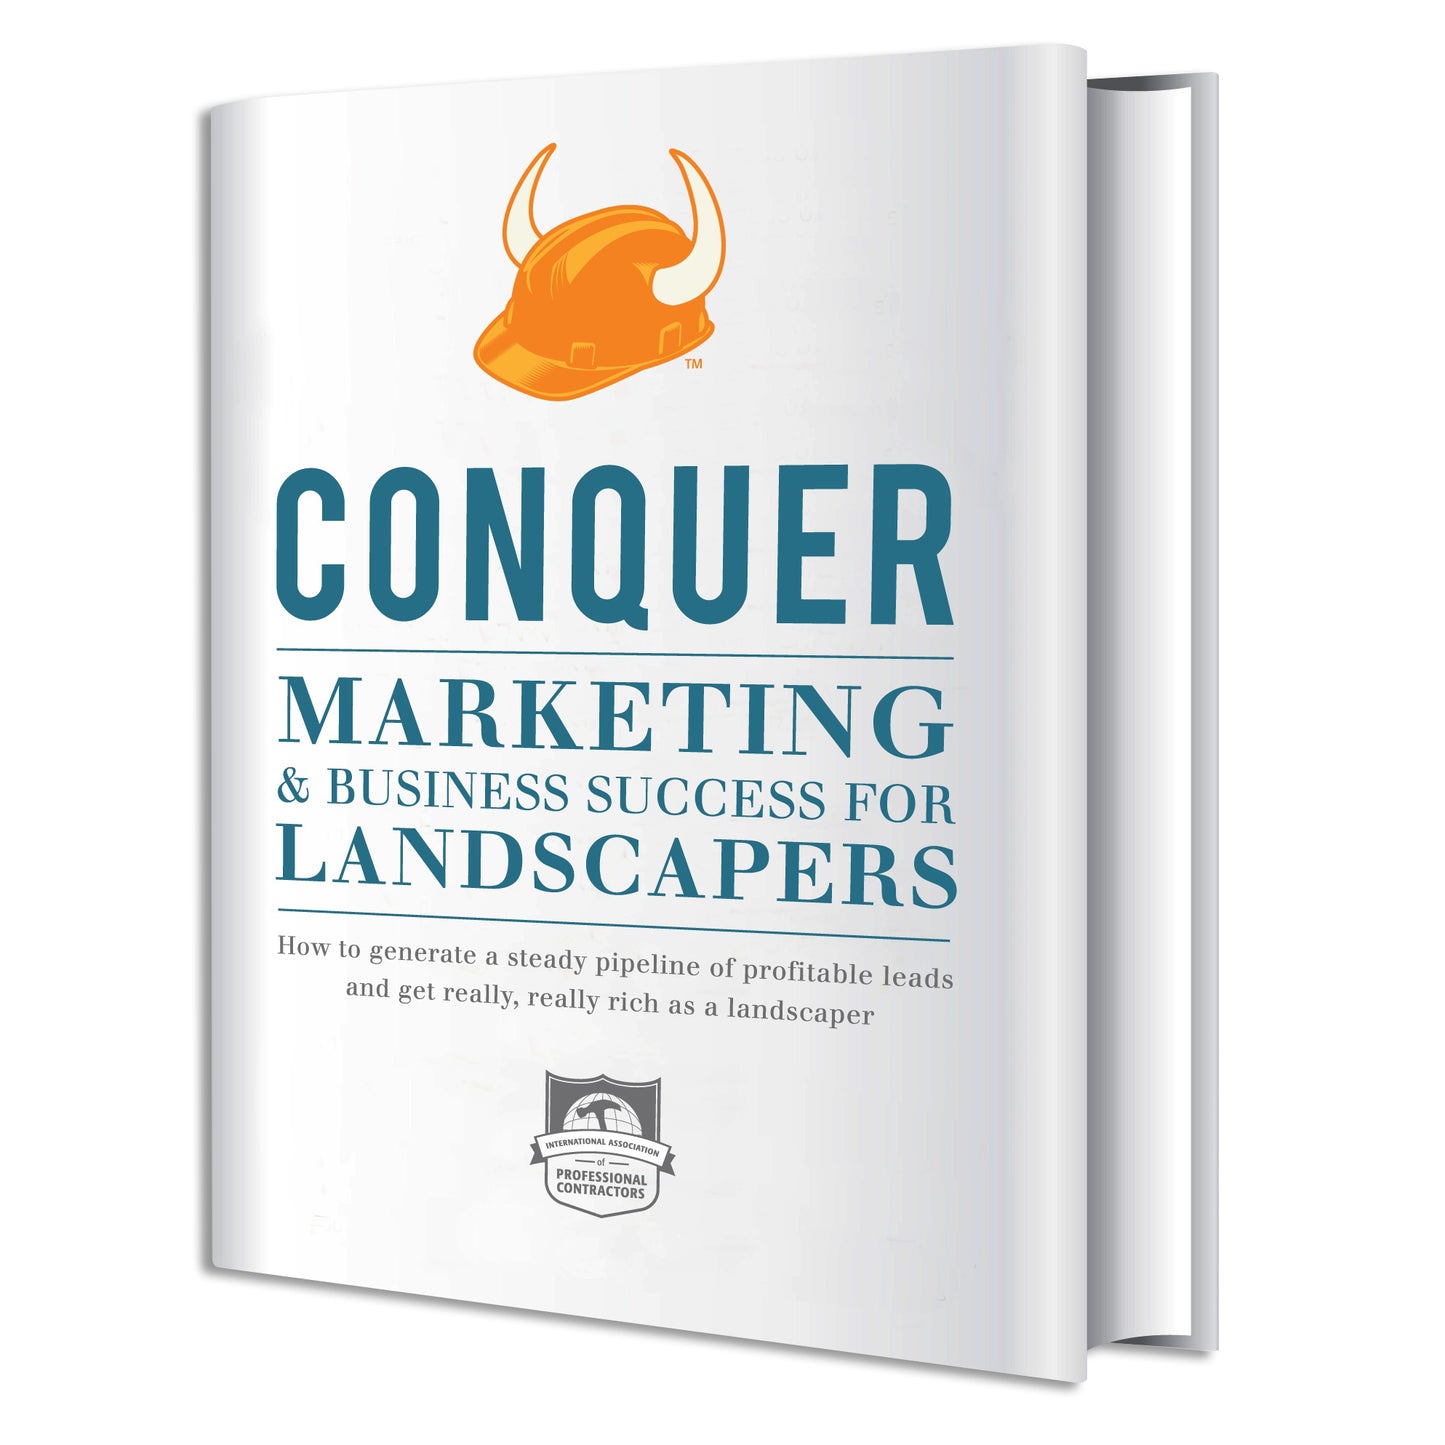 CONQUER Marketing and Business Success for Landscapers PDF